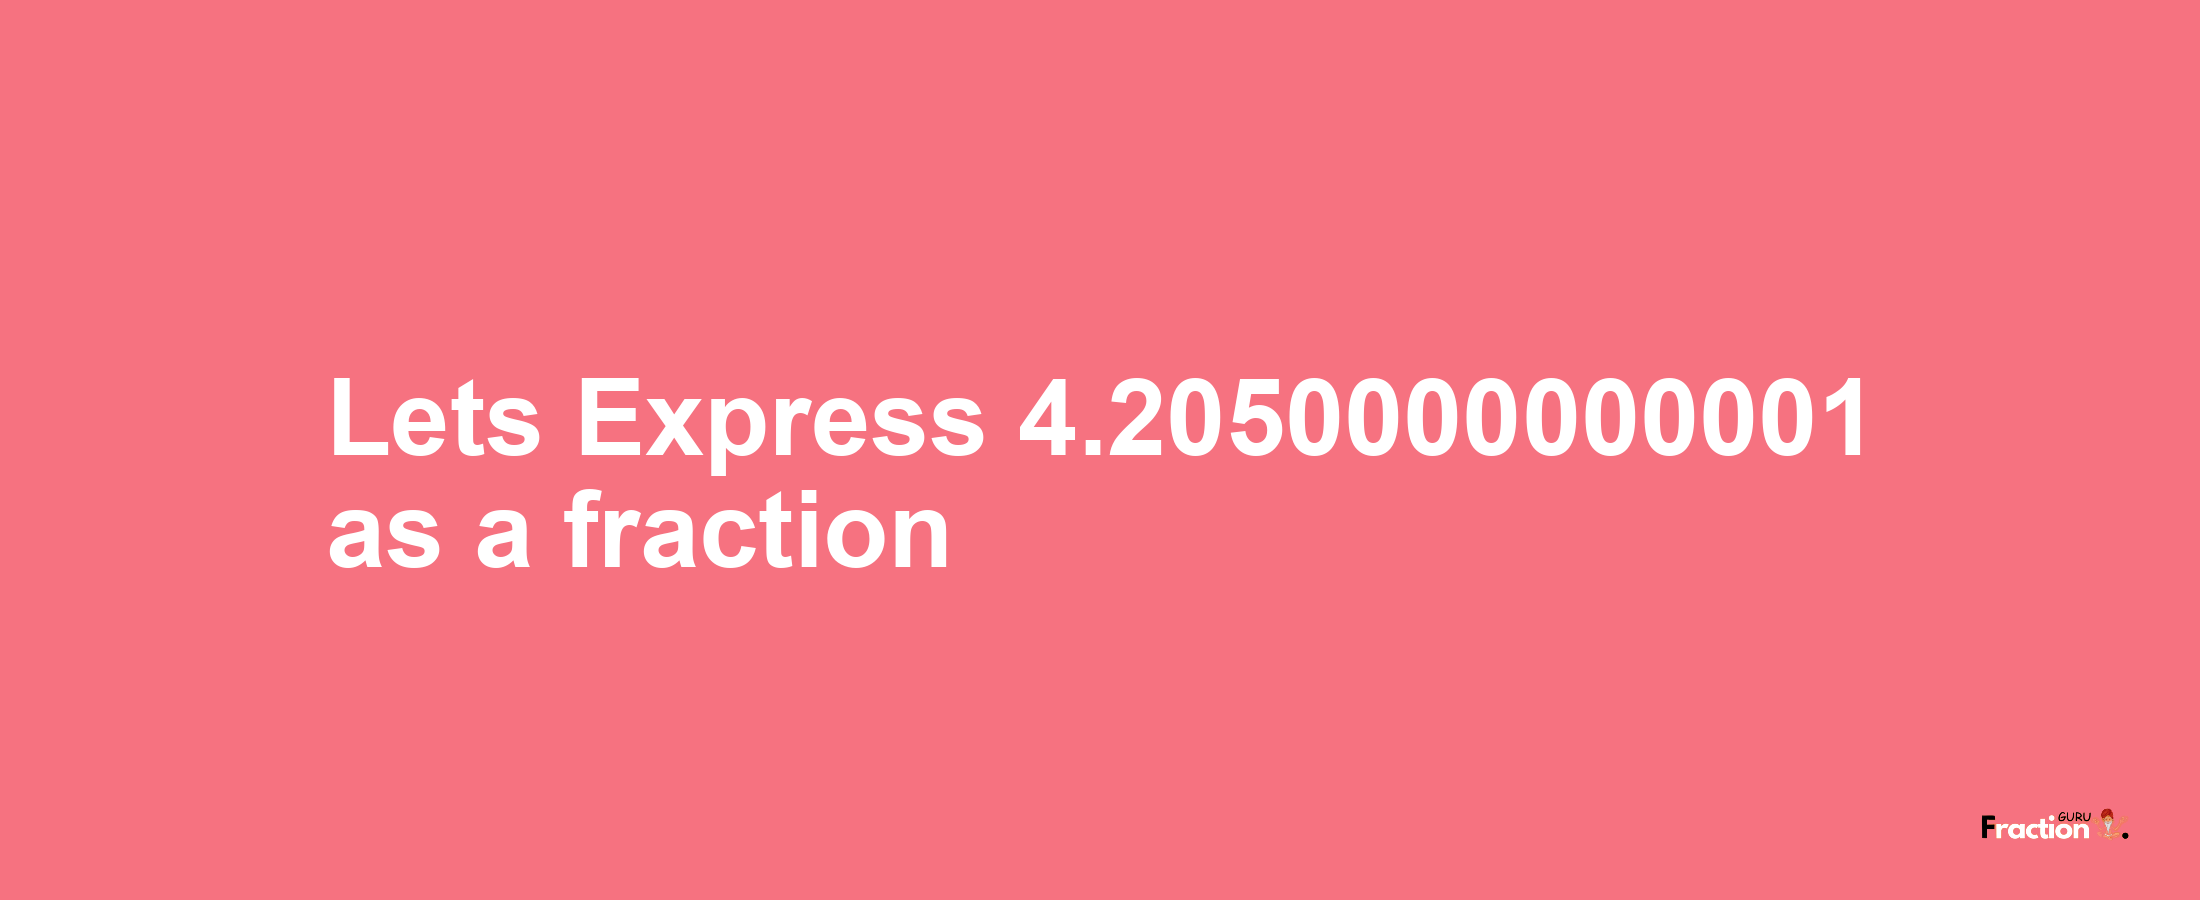 Lets Express 4.2050000000001 as afraction